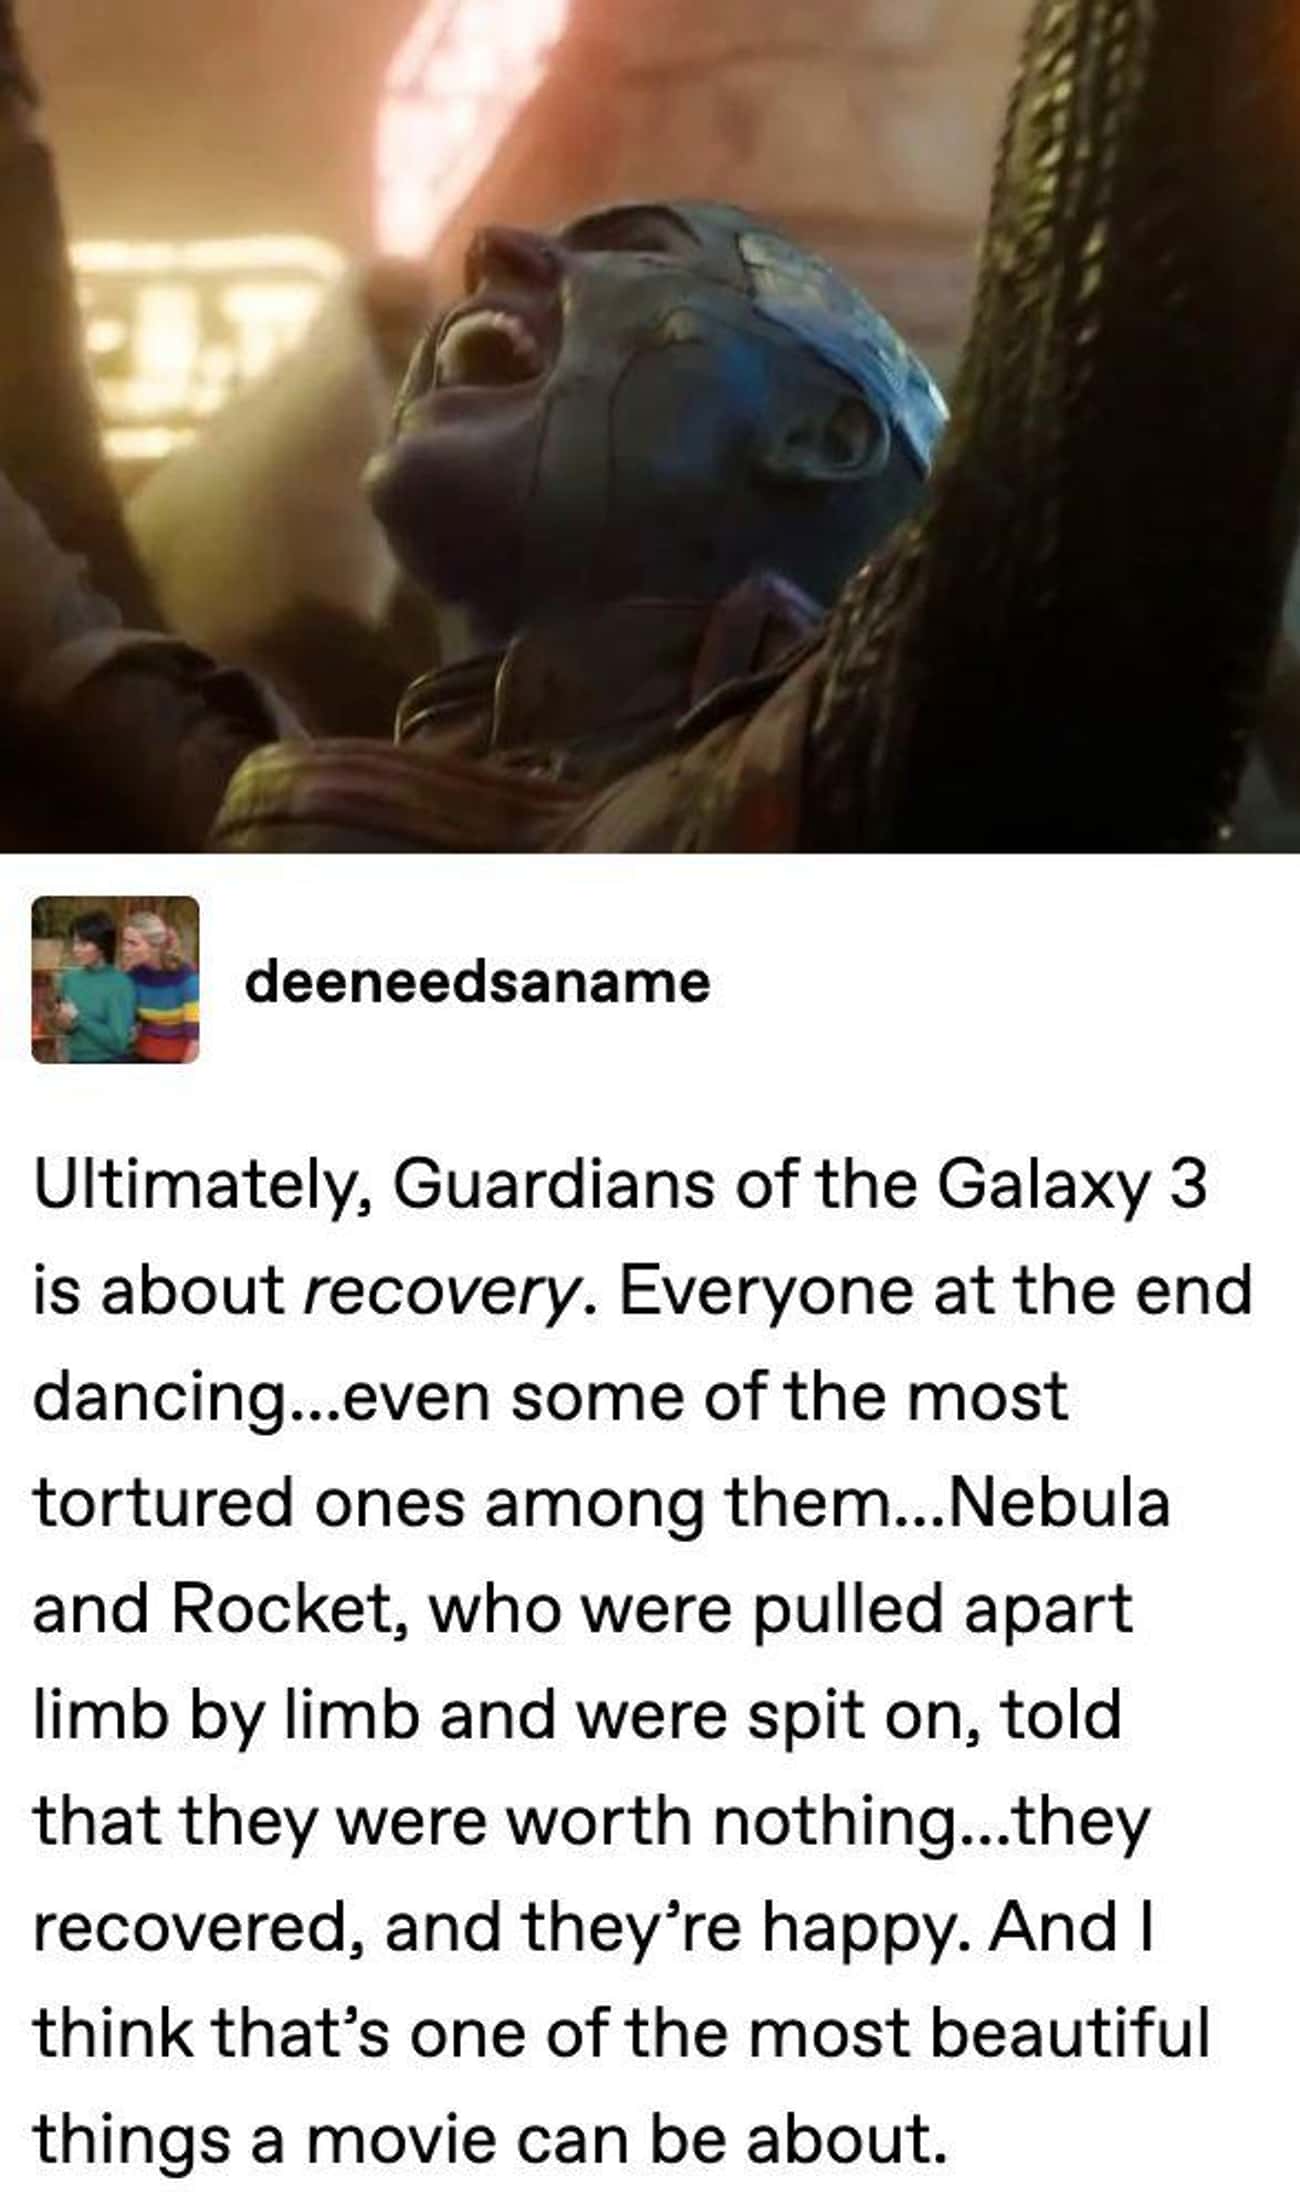 Vol. 3 Is About Rocket And Nebula's Recovery  